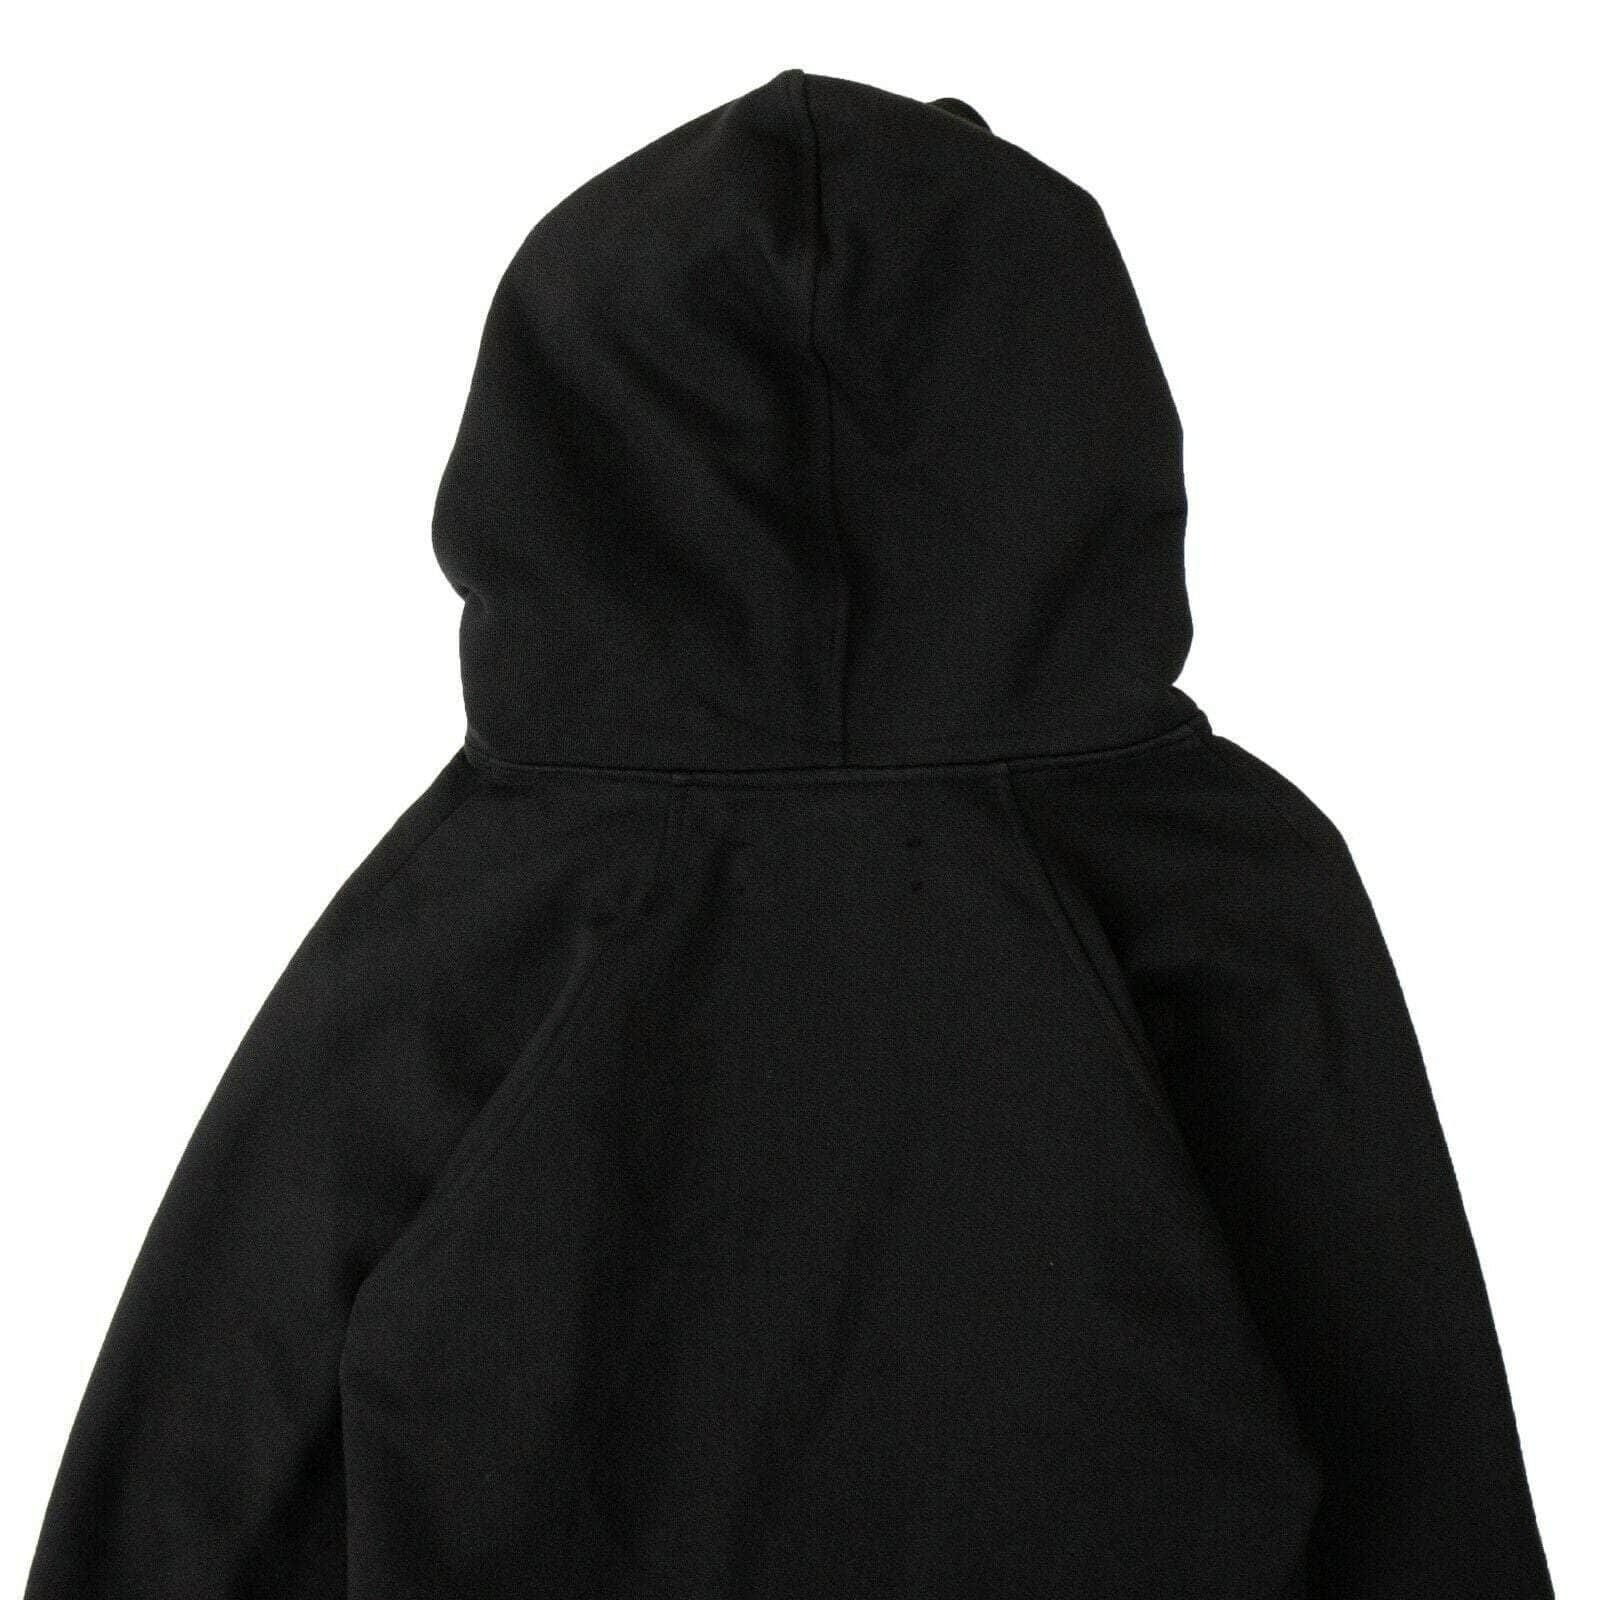 A_PLAN_APPLICATION a_plan_application, channelenable-all, couponcollection, gender-womens, main-clothing, size-s, under-250 S Black Cotton Long Sleeve Hooded Midi Dress 82NGG-AP-11/S 82NGG-AP-11/S